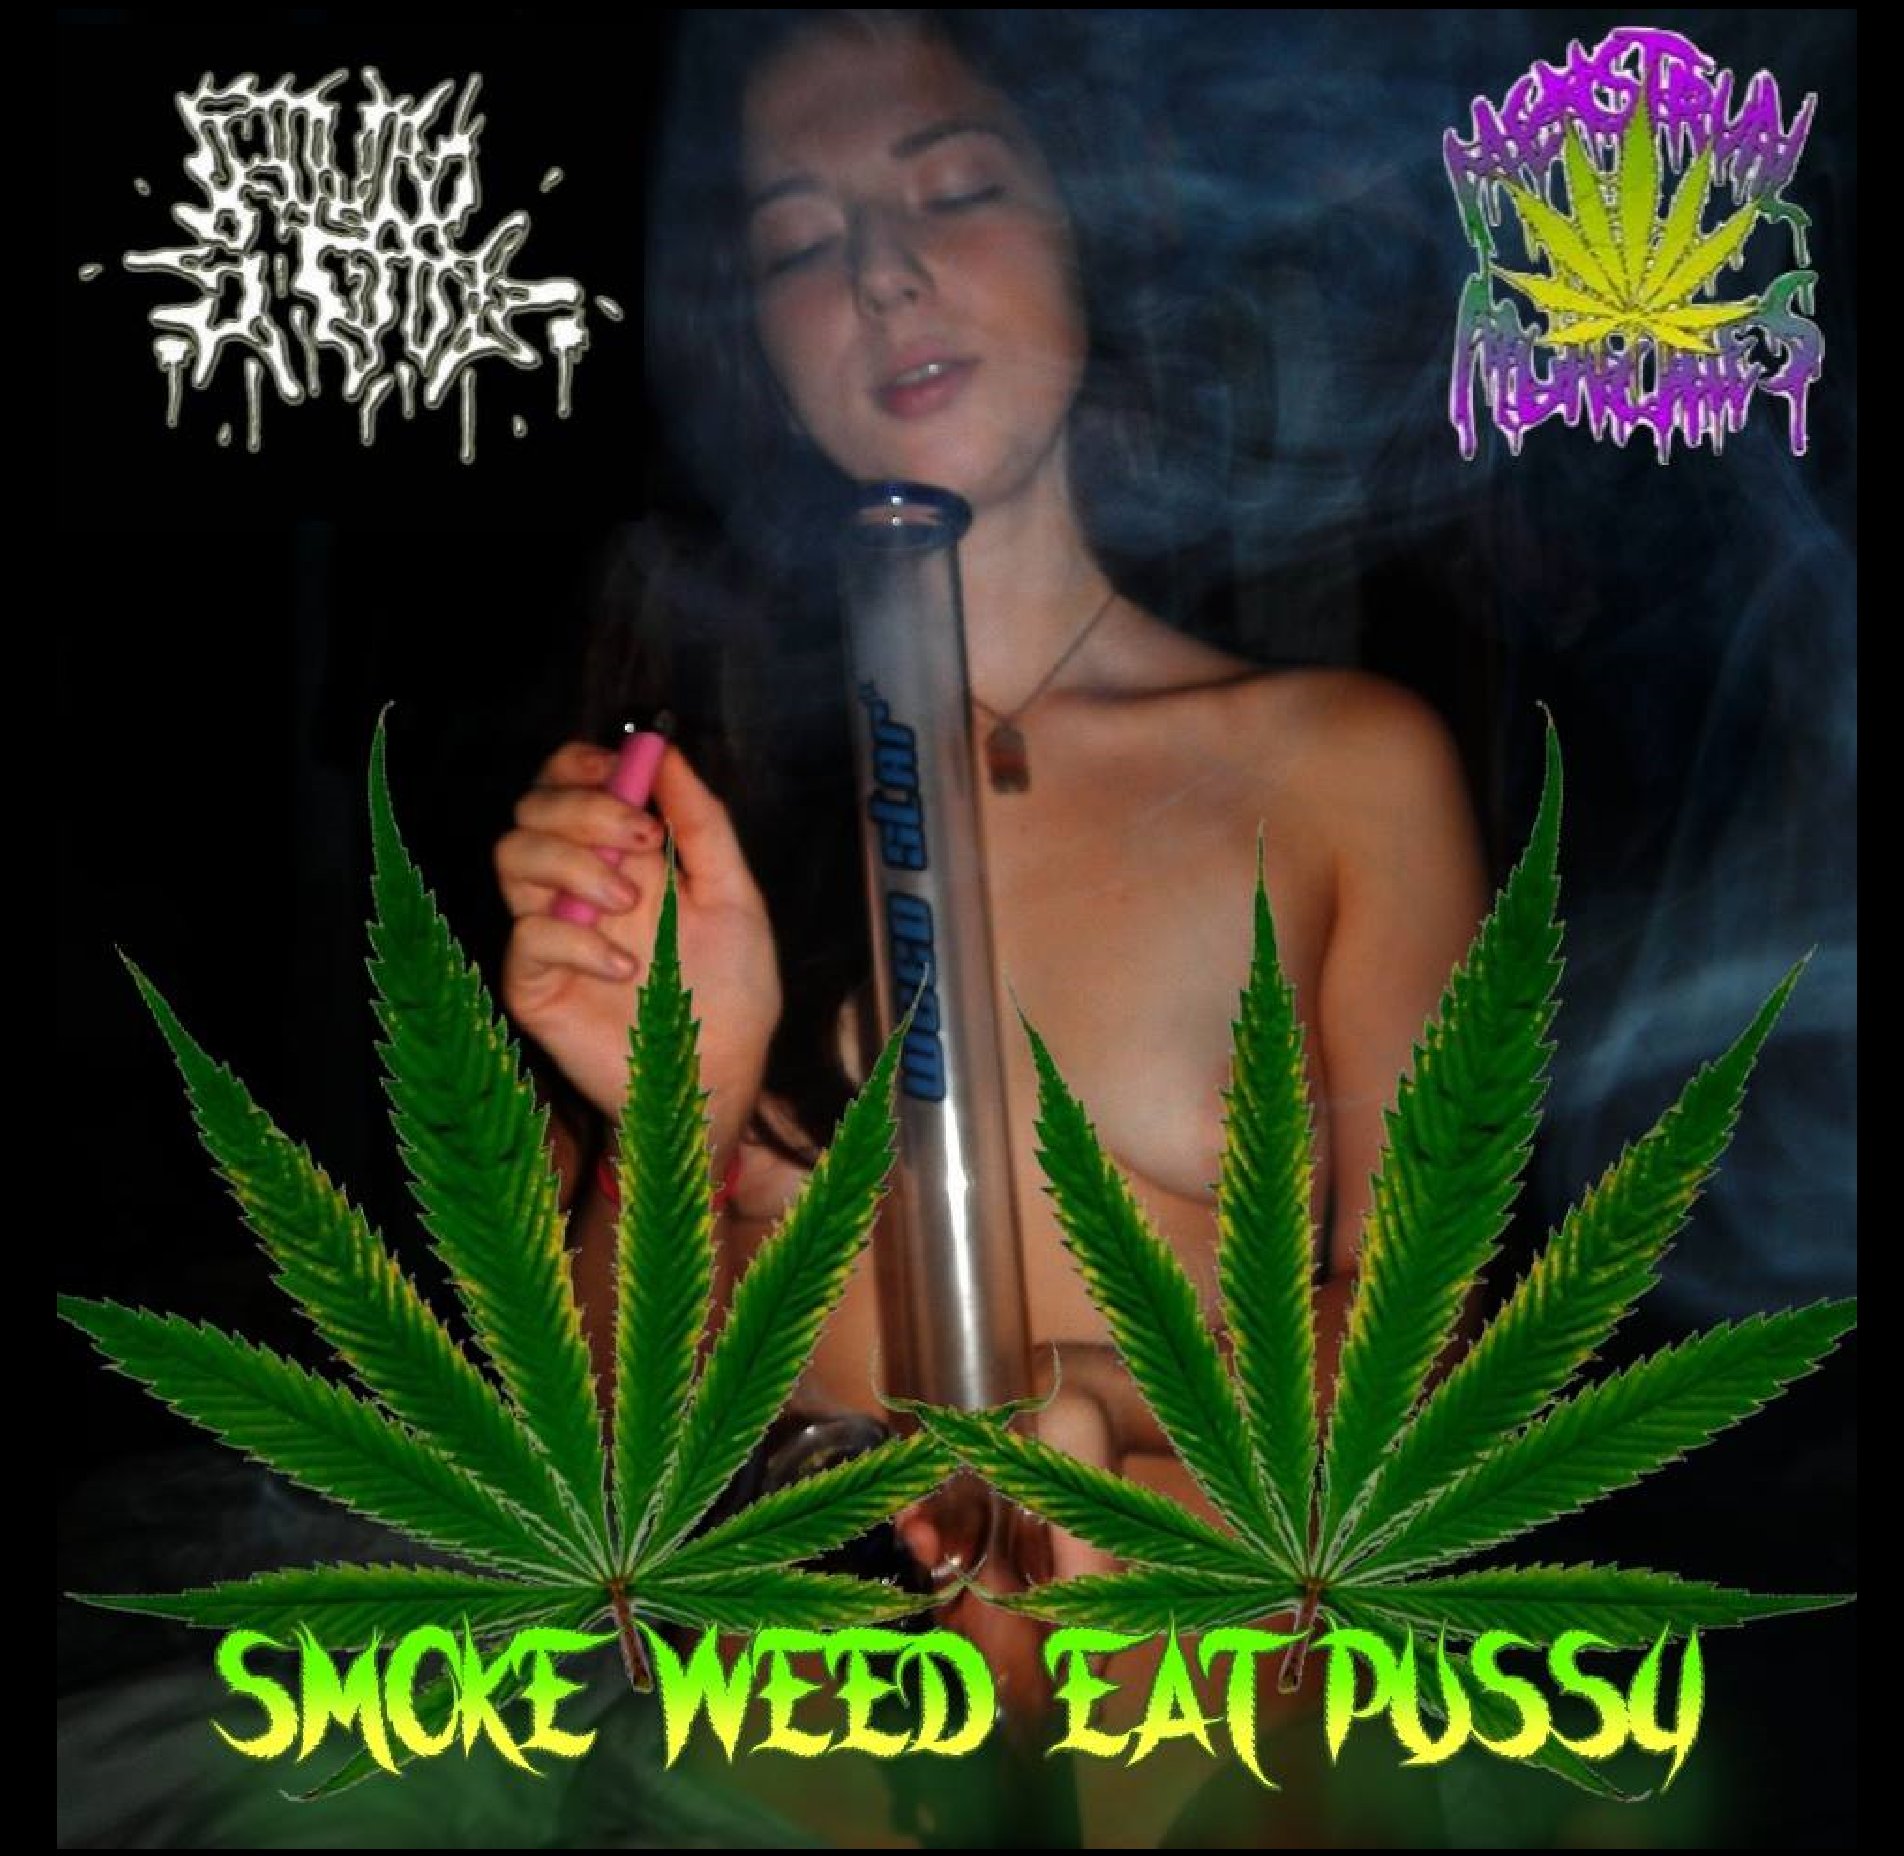 best of Eats pussy weed